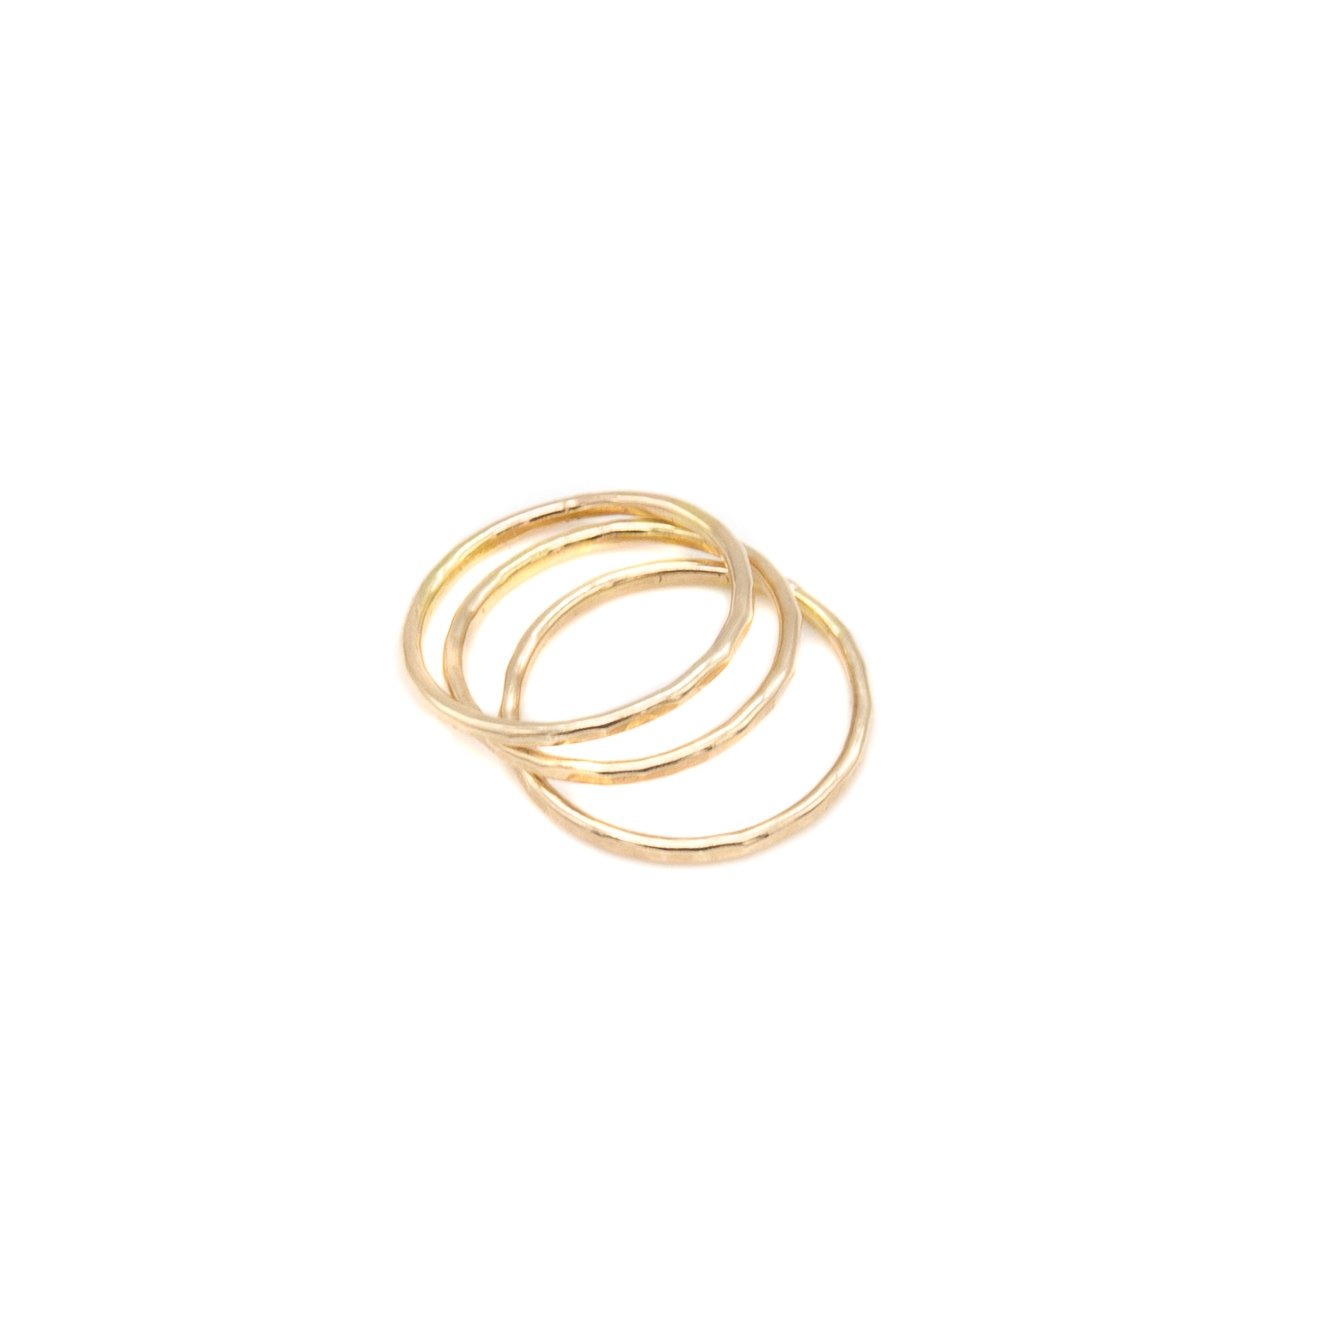 Chic Stackable Ring, 14k Gold Fill